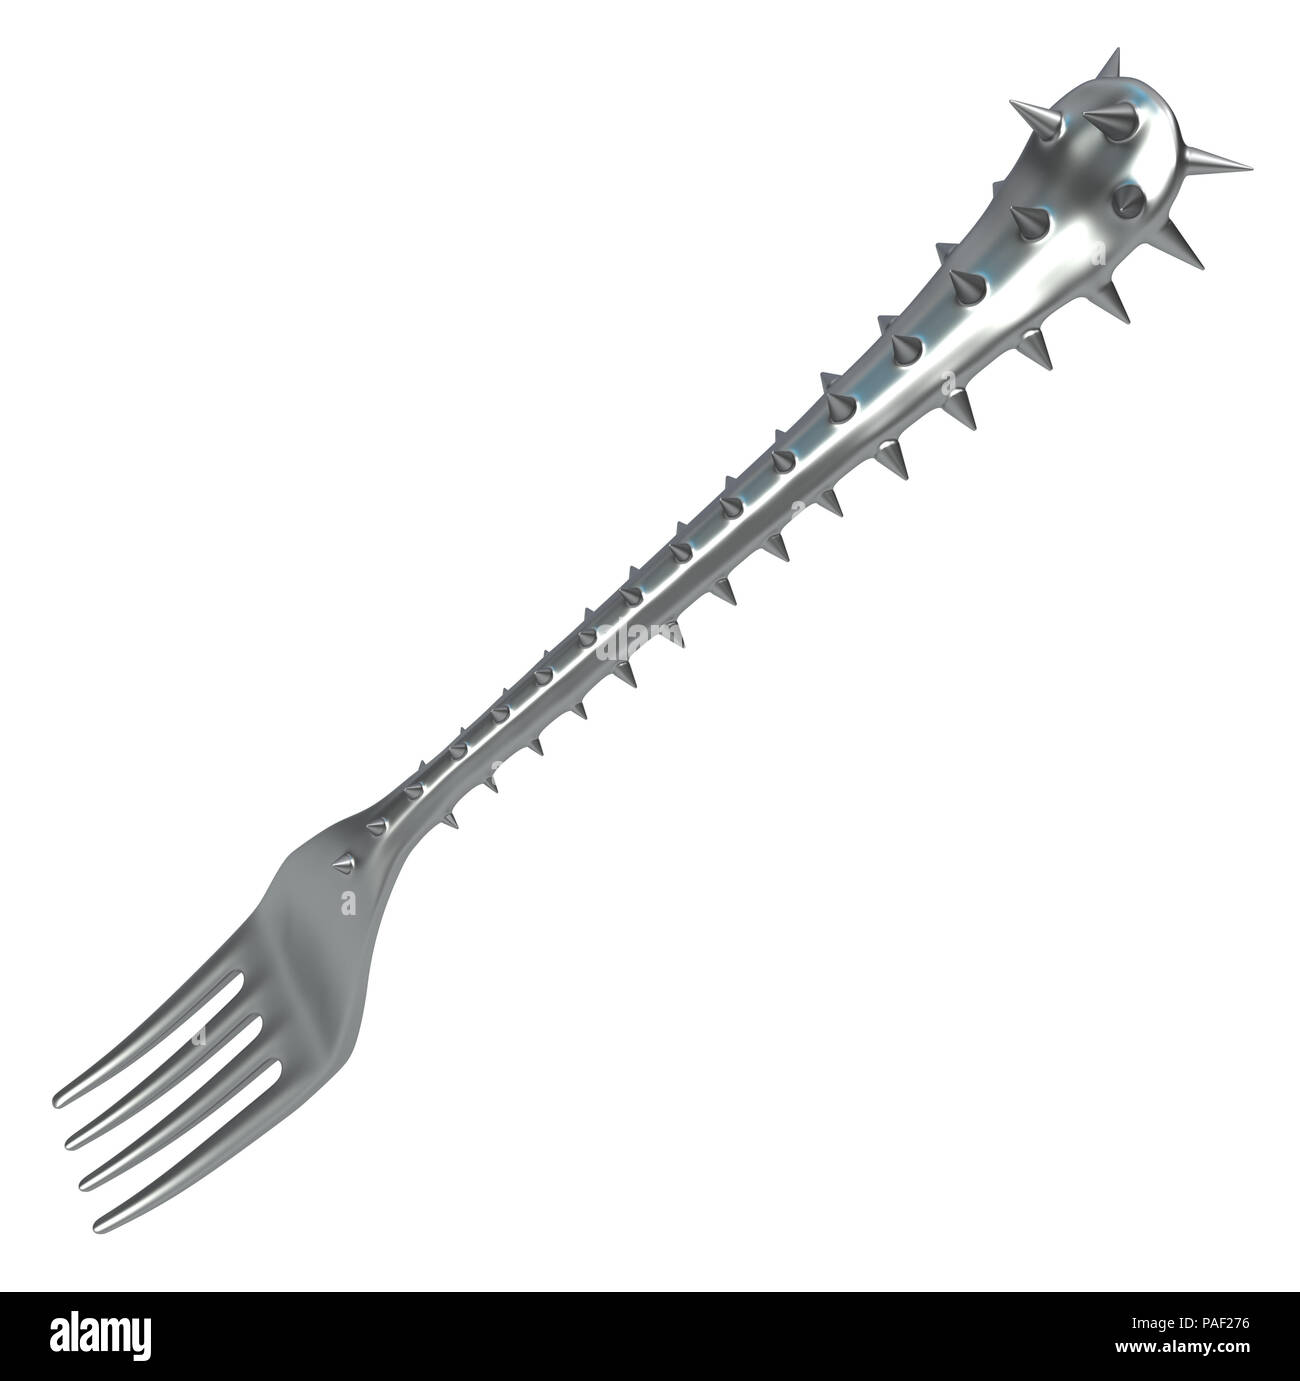 Fork handle covered in sharp spikes, metaphor 3d illustration, horizontal, isolated, over white Stock Photo